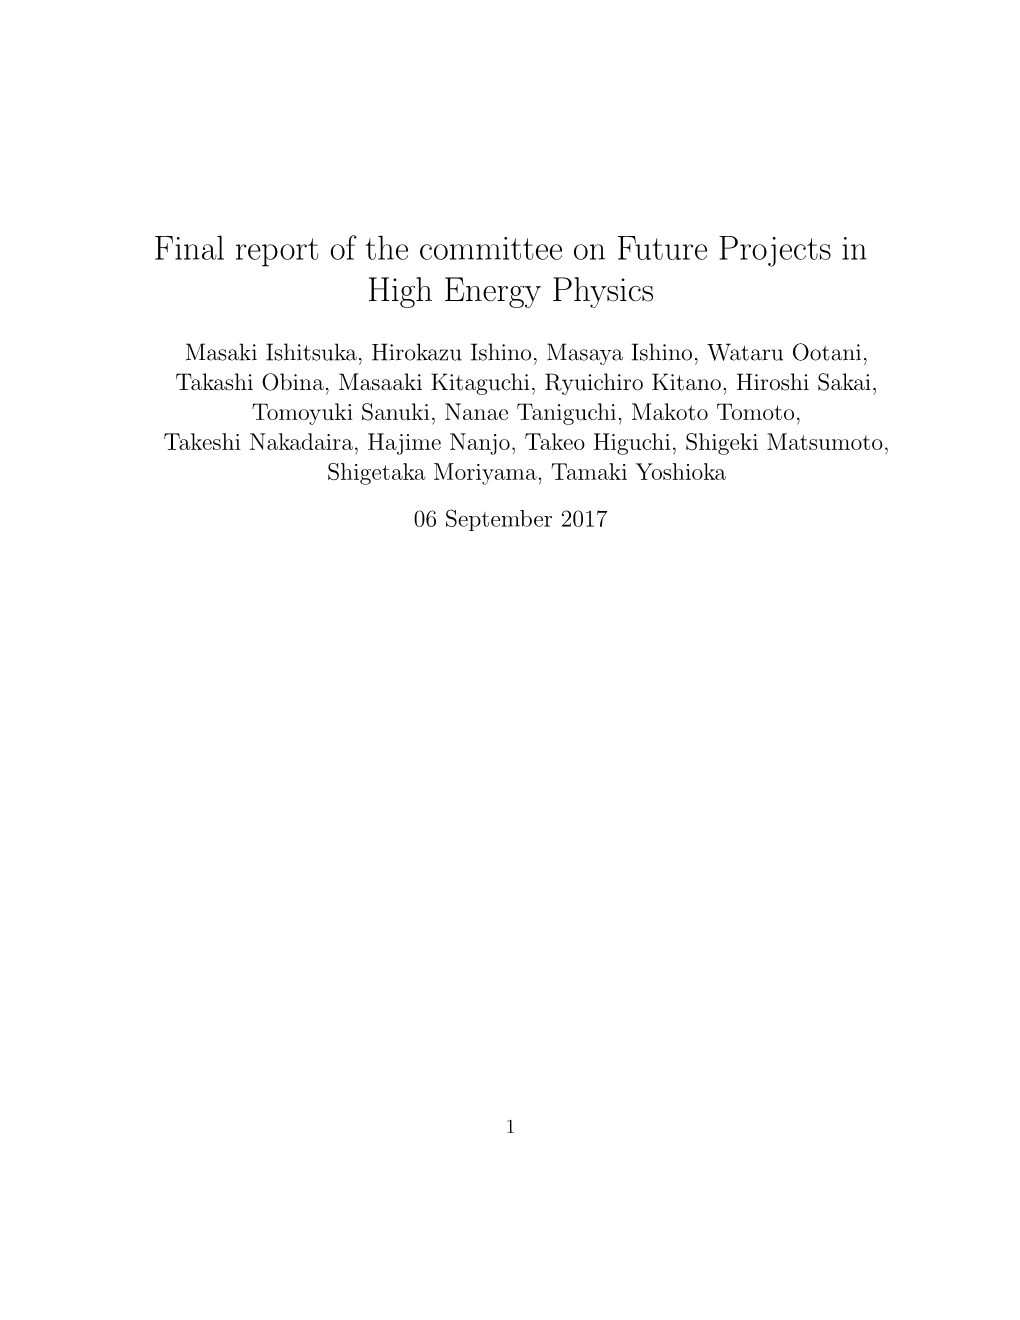 Final Report of the Committee on Future Projects in High Energy Physics